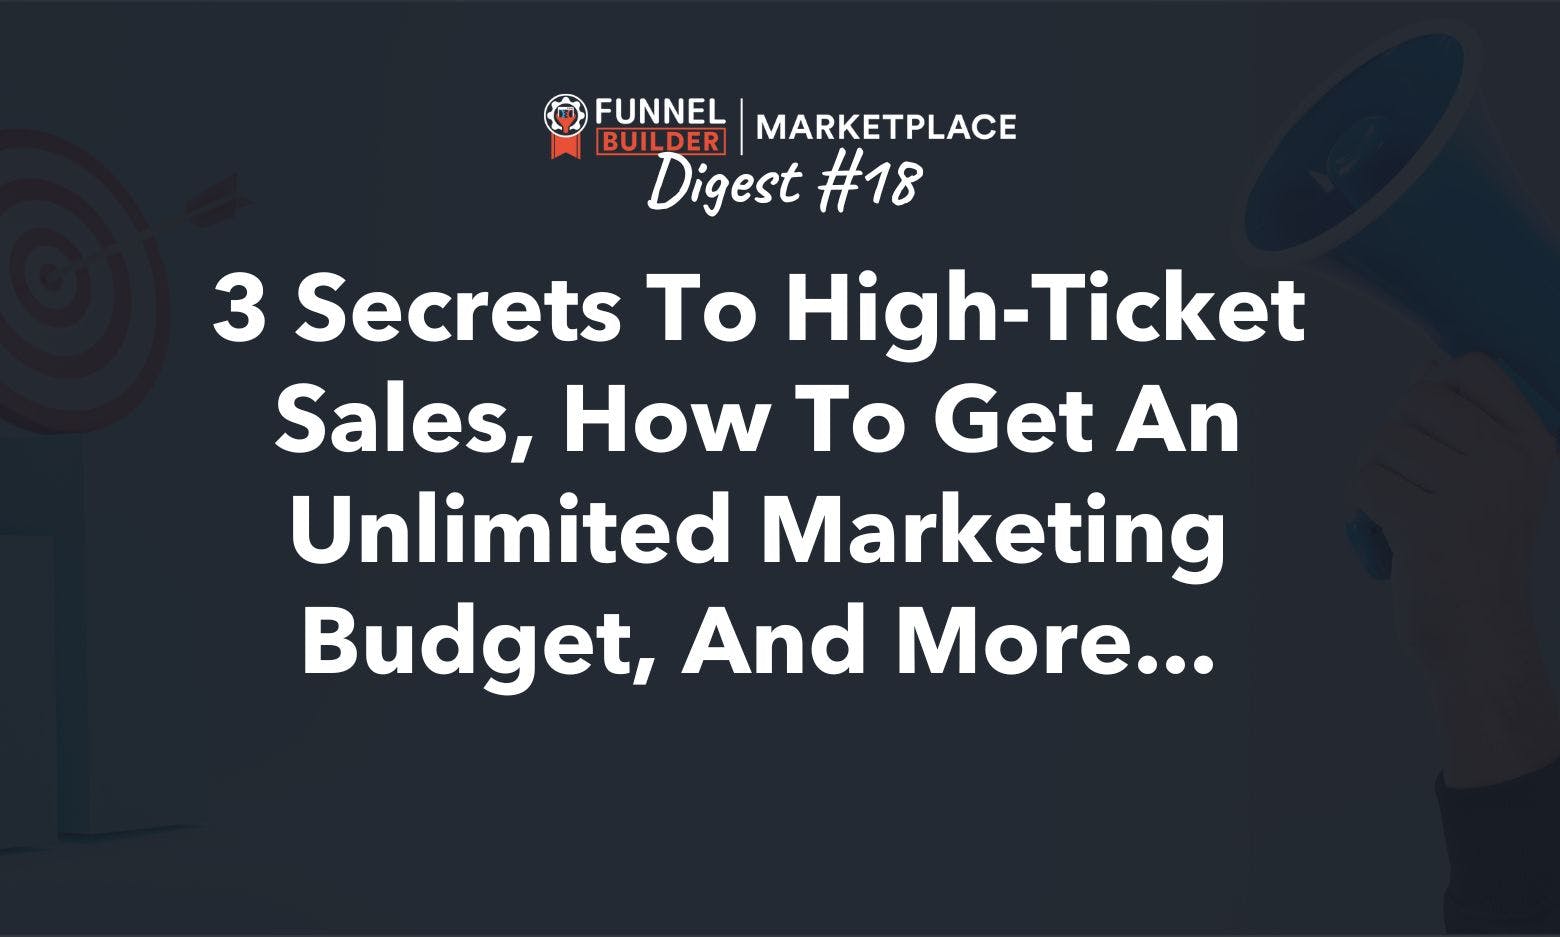 Rolodex Digest #18: 3 secrets to high-ticket sales, how to get an unlimited marketing budget, and more...